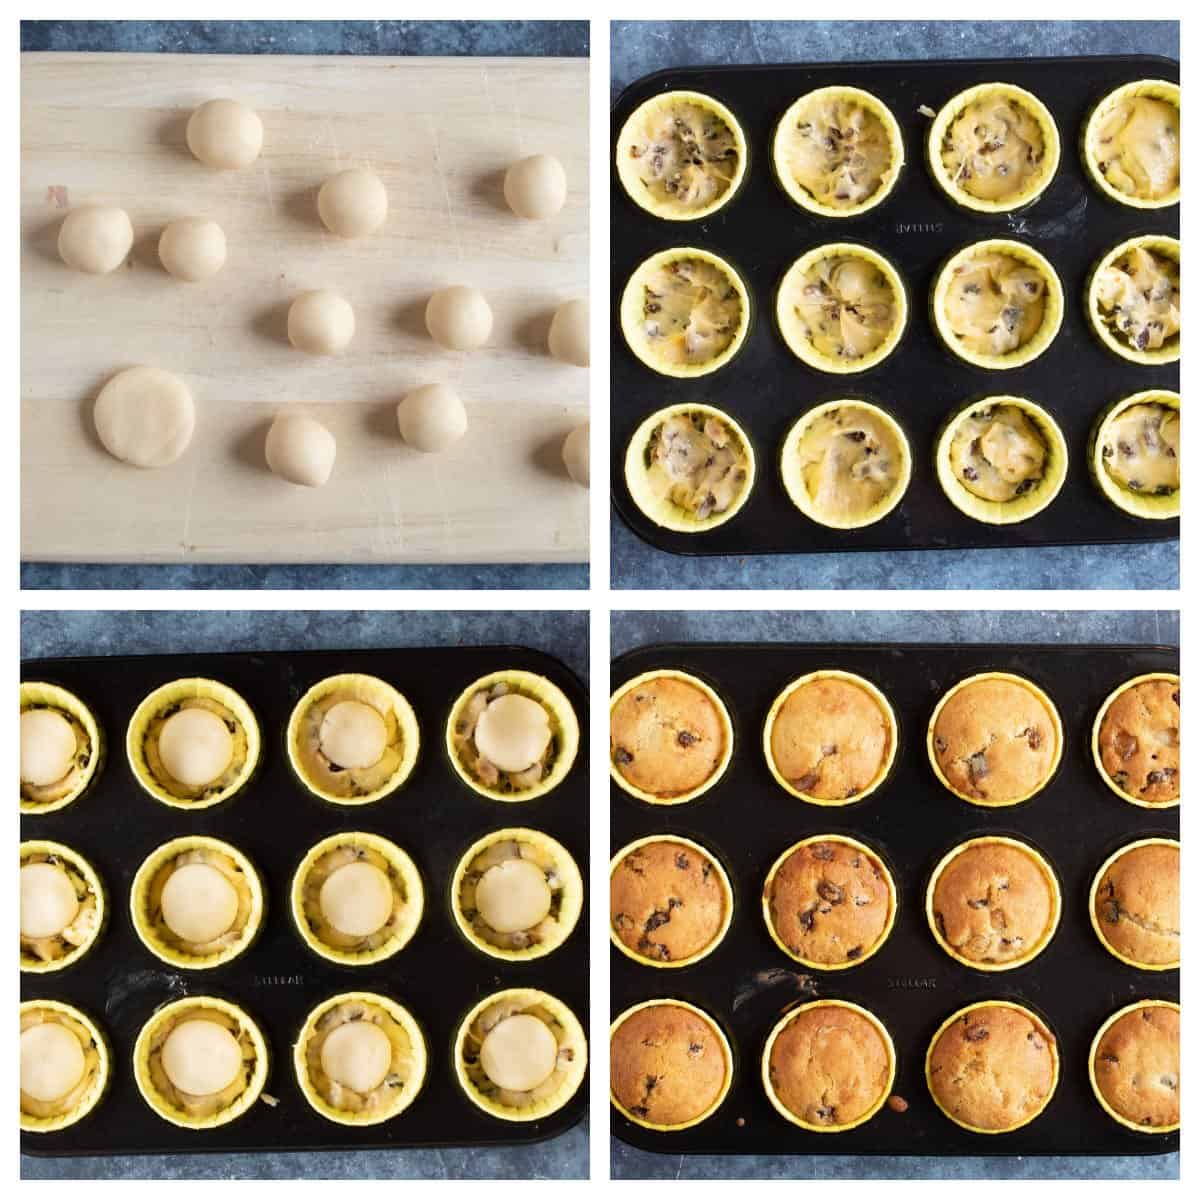 Baking the Simnel muffins in a 12 hole muffin tin.